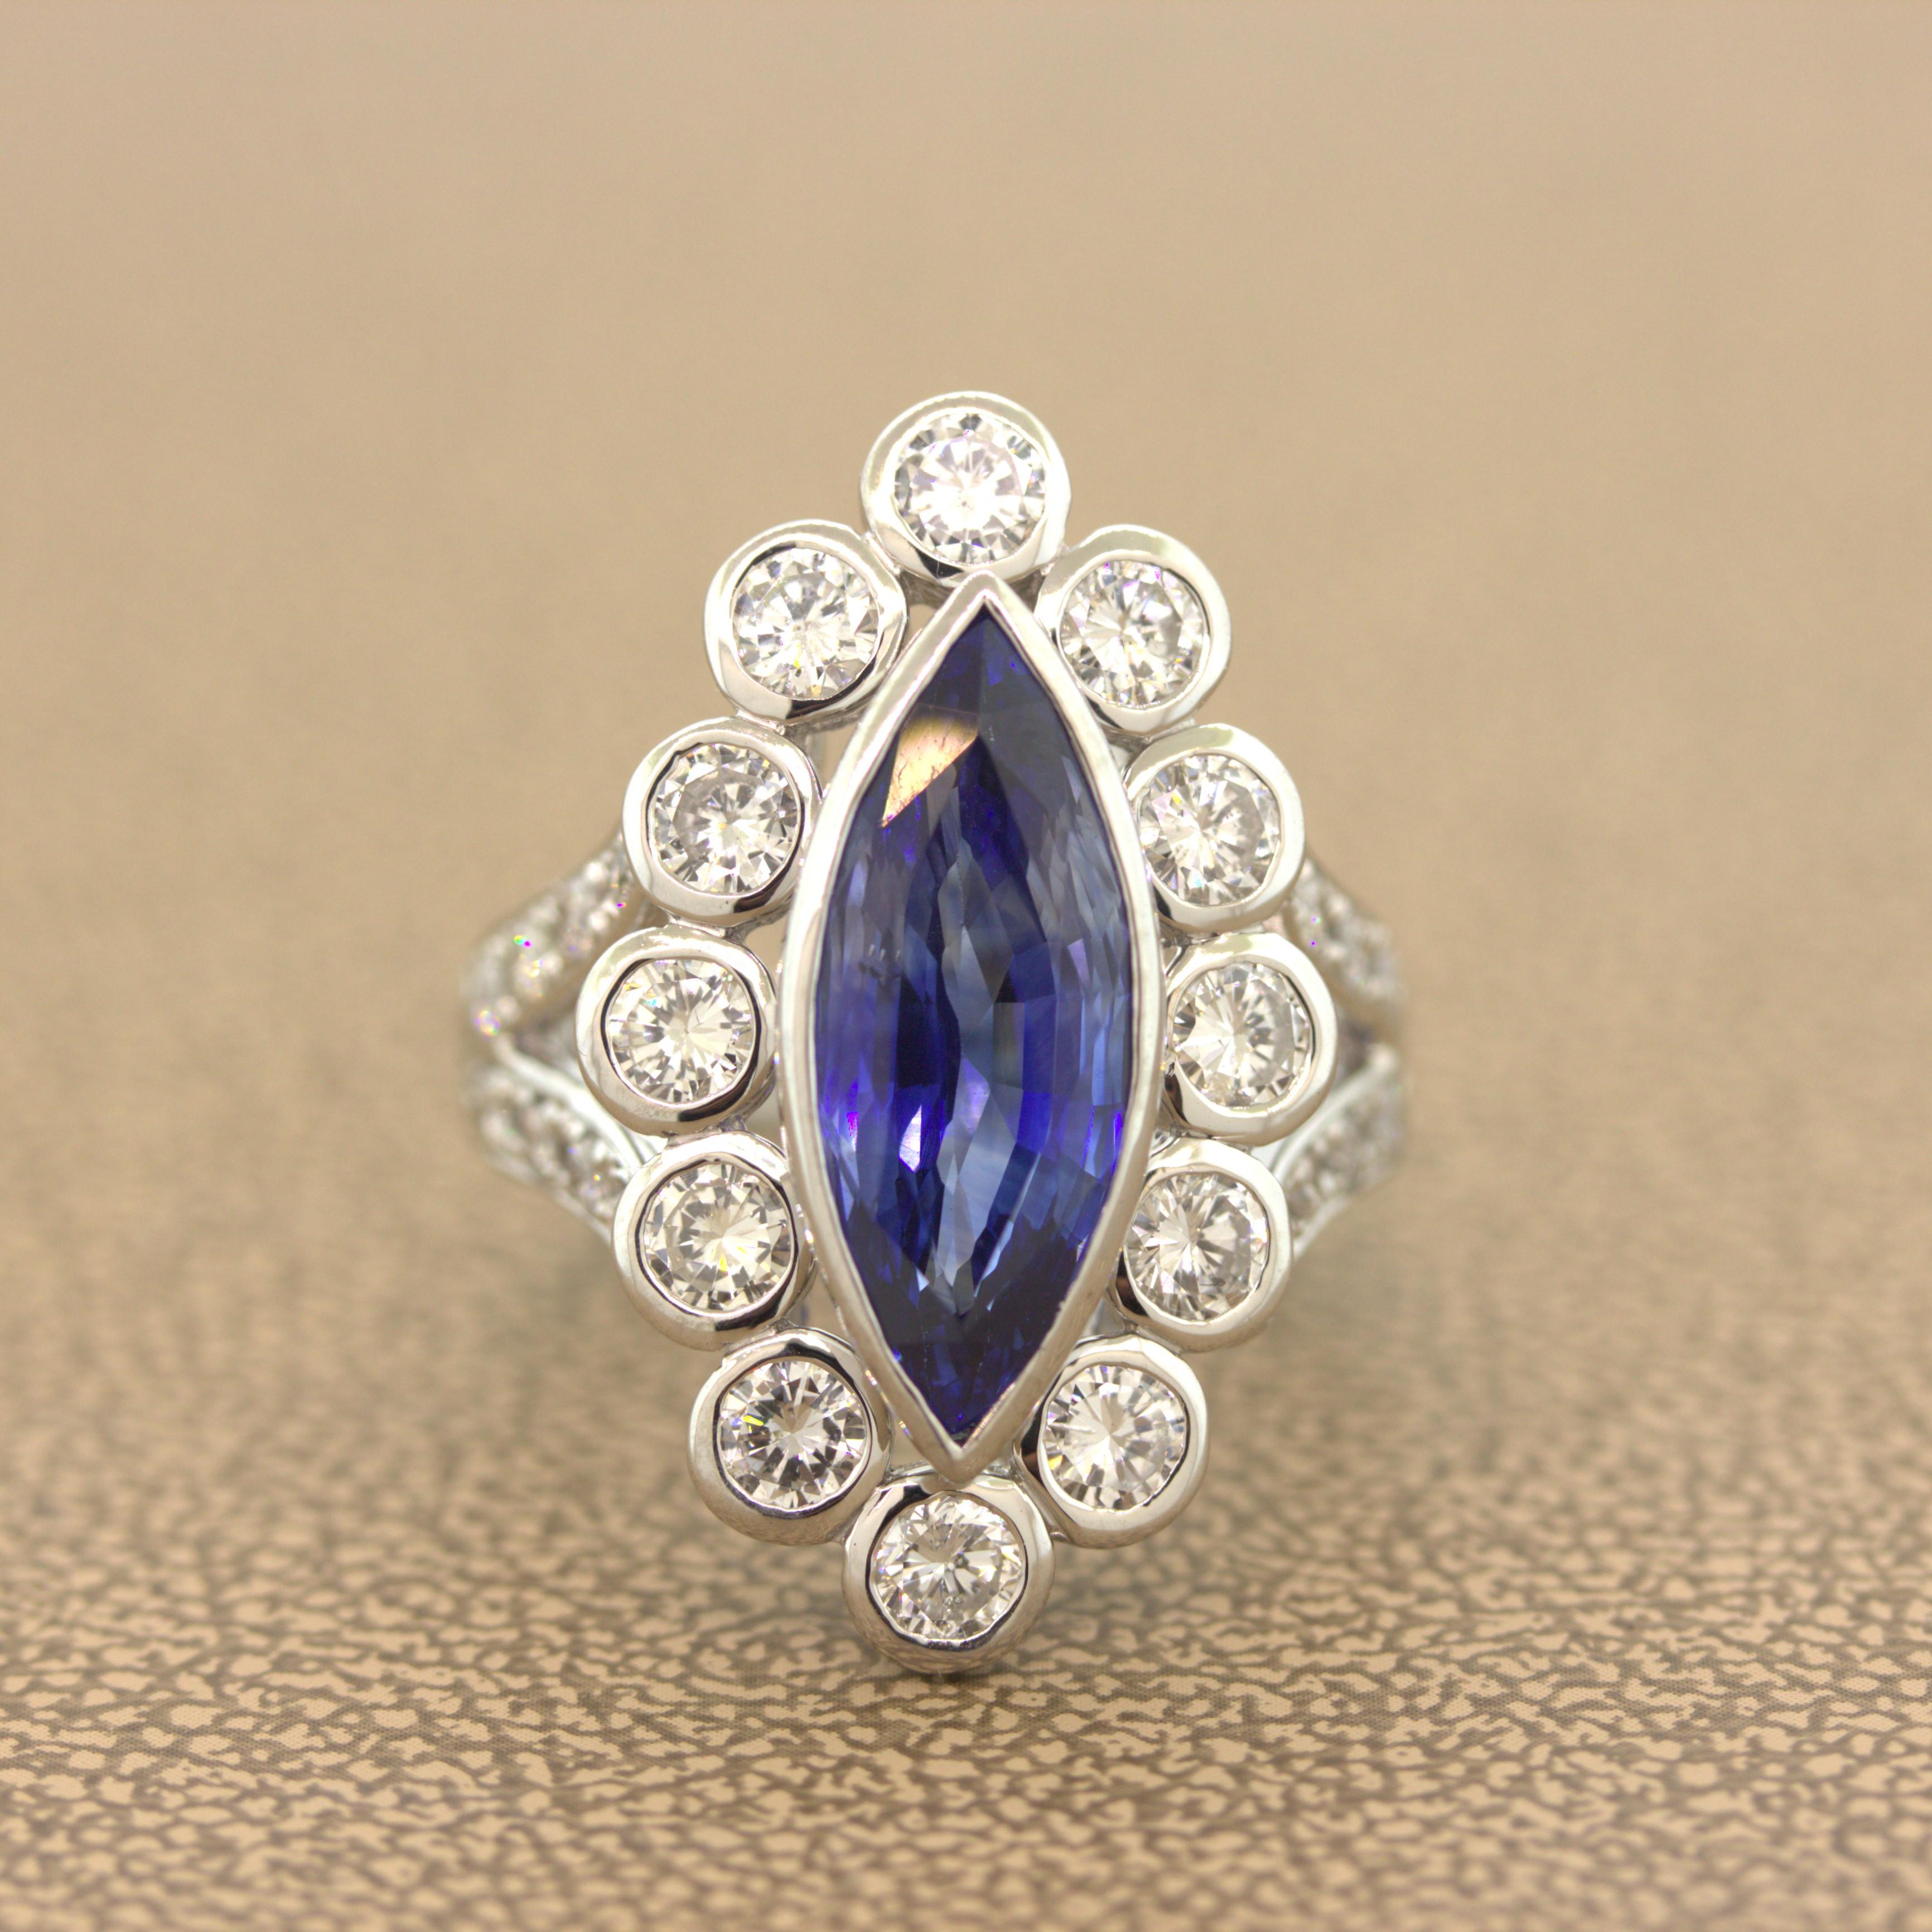 A classic navette ring featuring a long marquise-shape Ceylon sapphire weighing 6.55 carats. It has been certified by the GIA as natural and has a rich bright blue color with excellent clarity as the stone has no eye visible inclusions. Surrounding